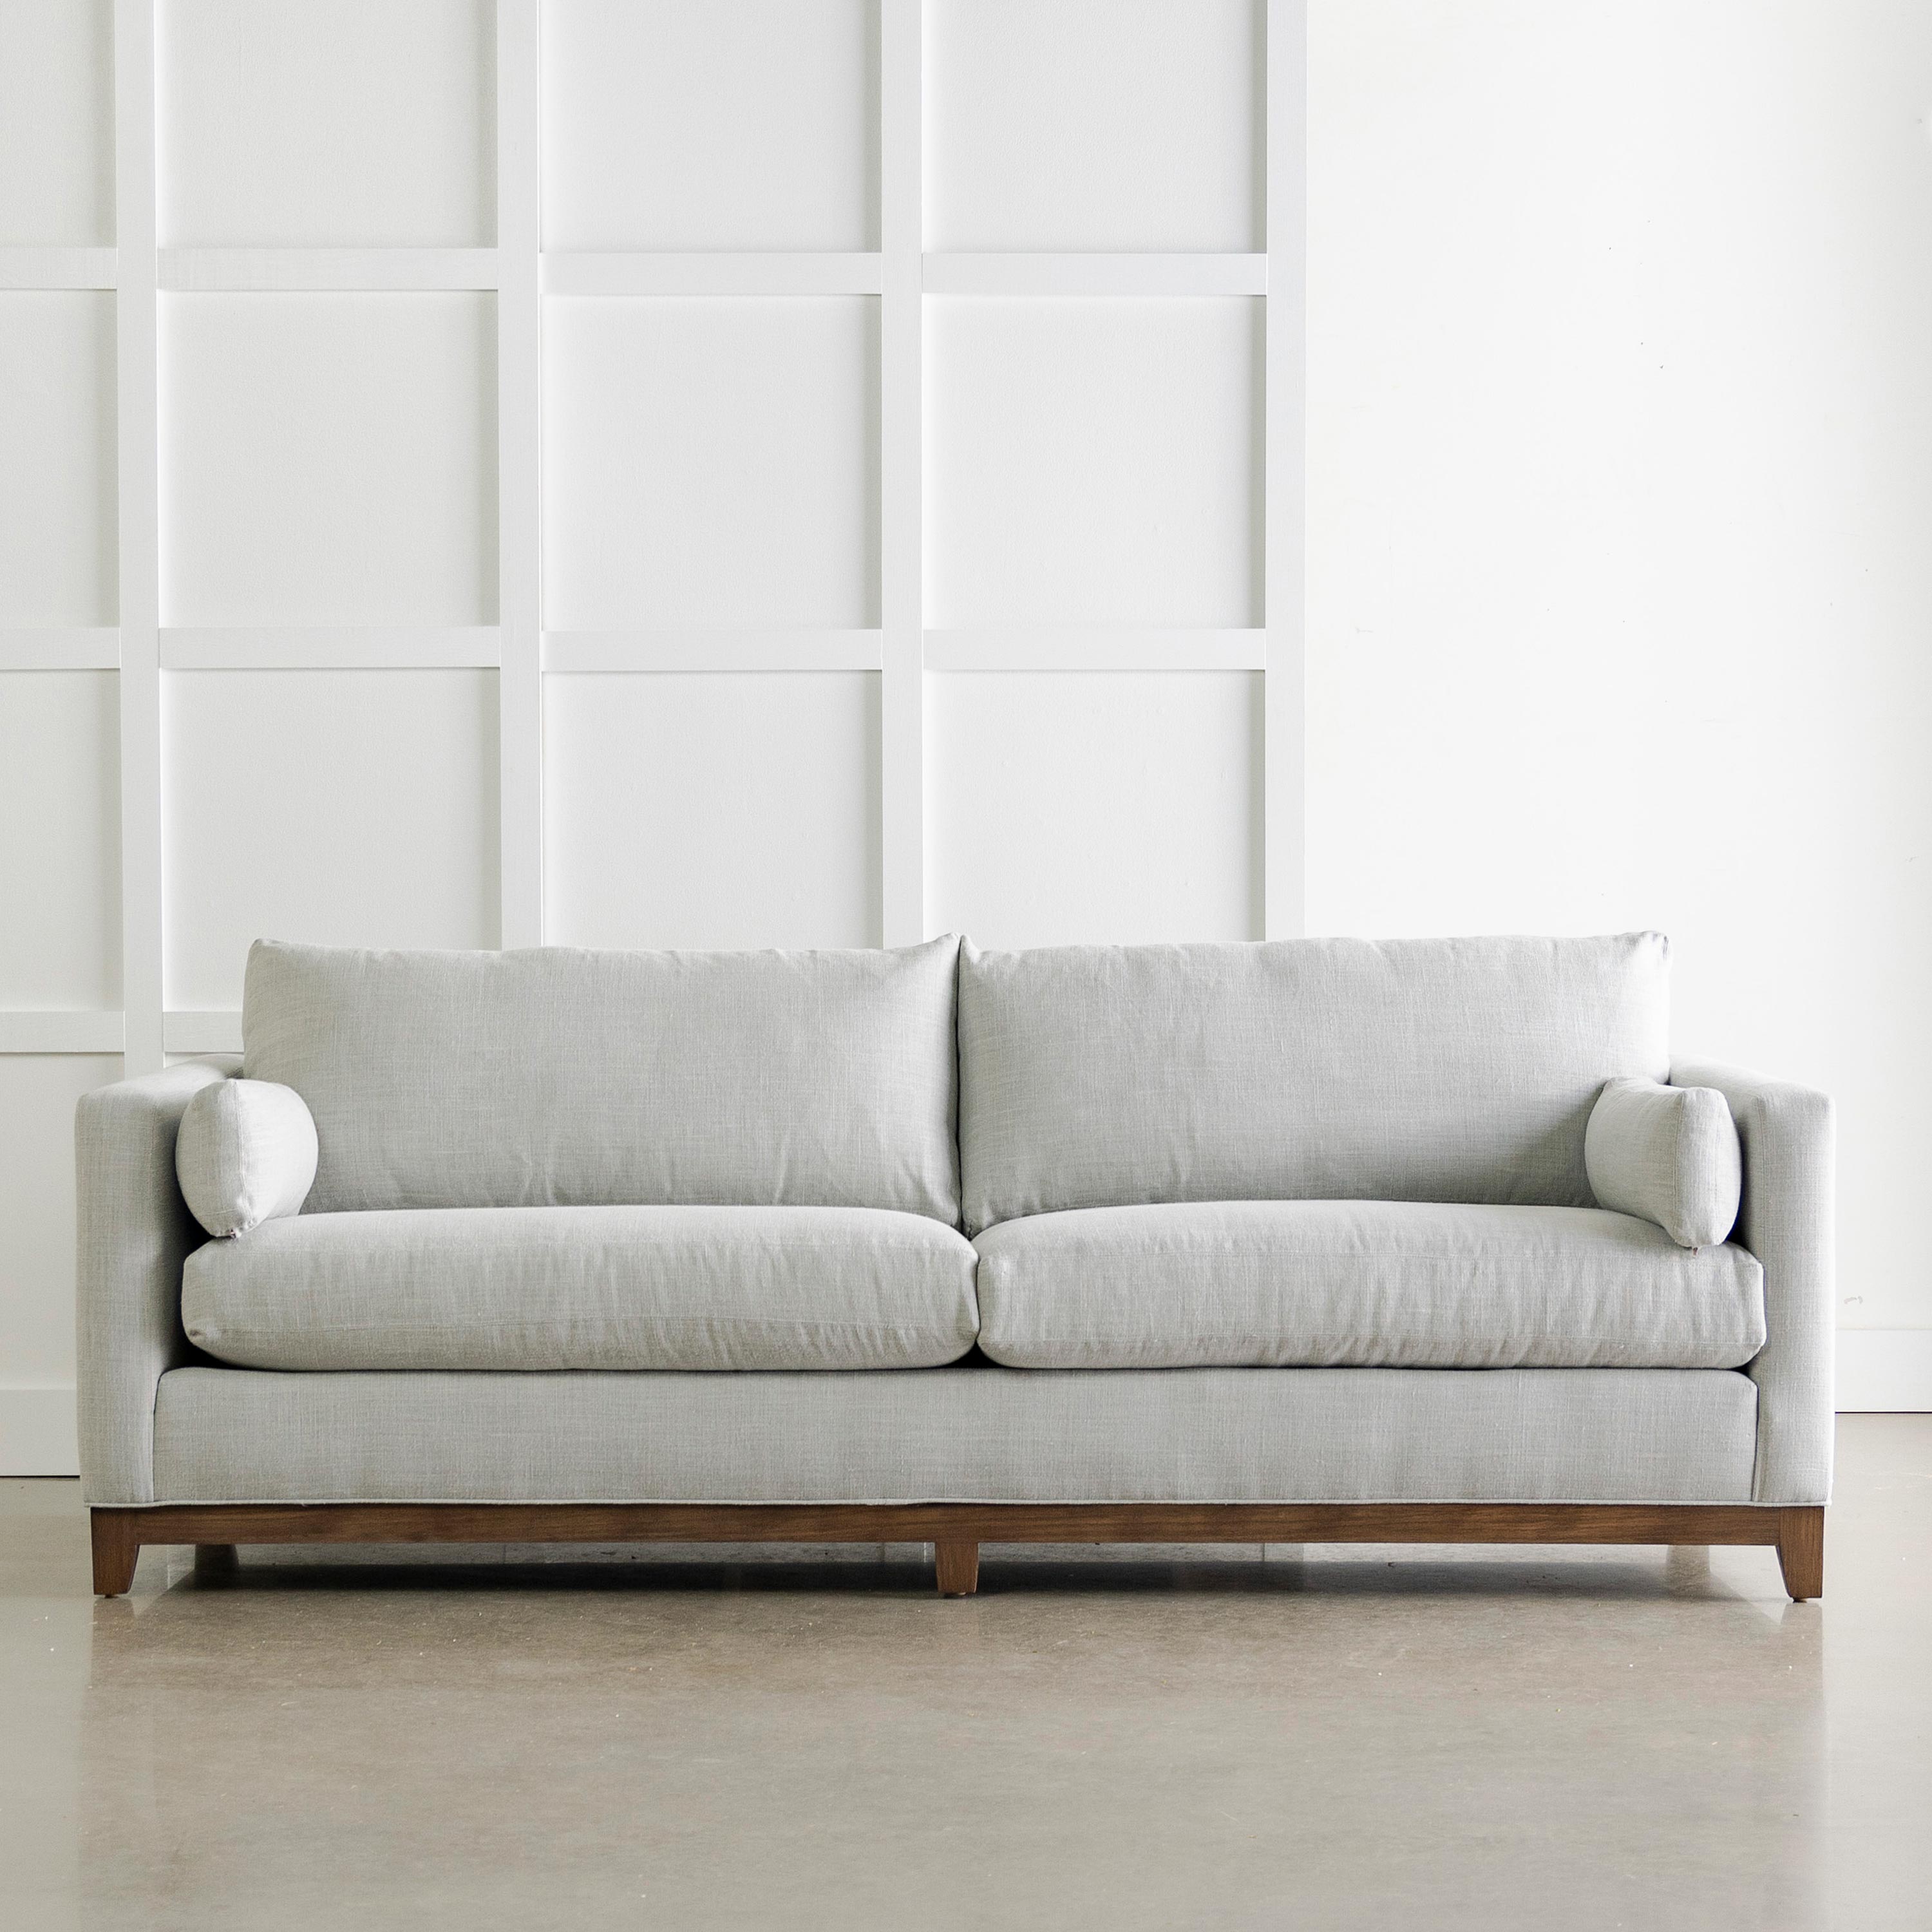 Upholstered Studio Sofa and Chair Collection